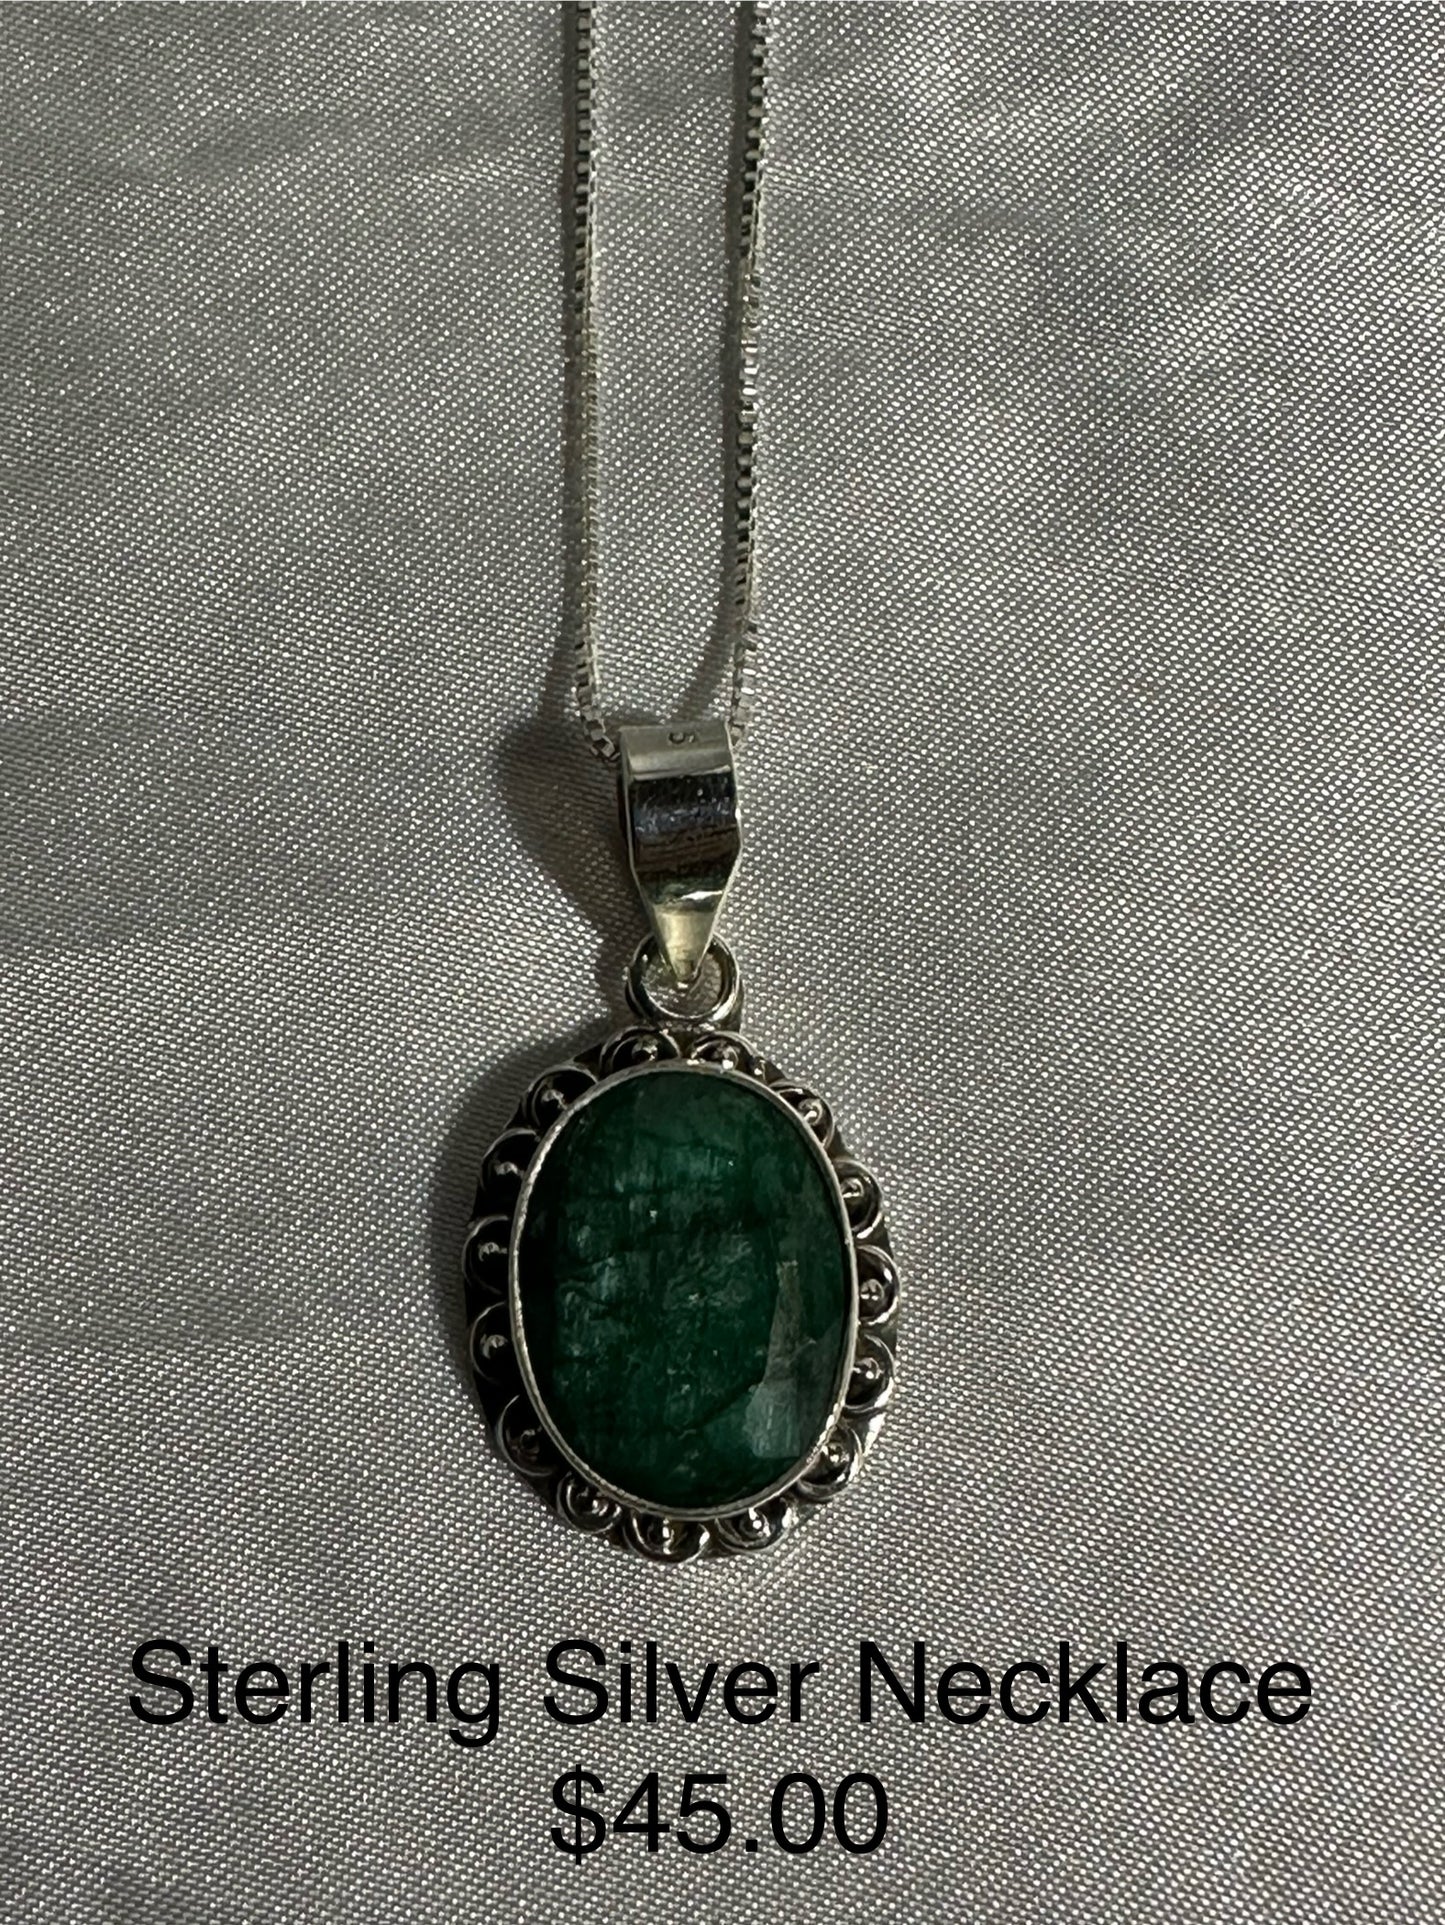 STERLING SILVER NECKLACE  1